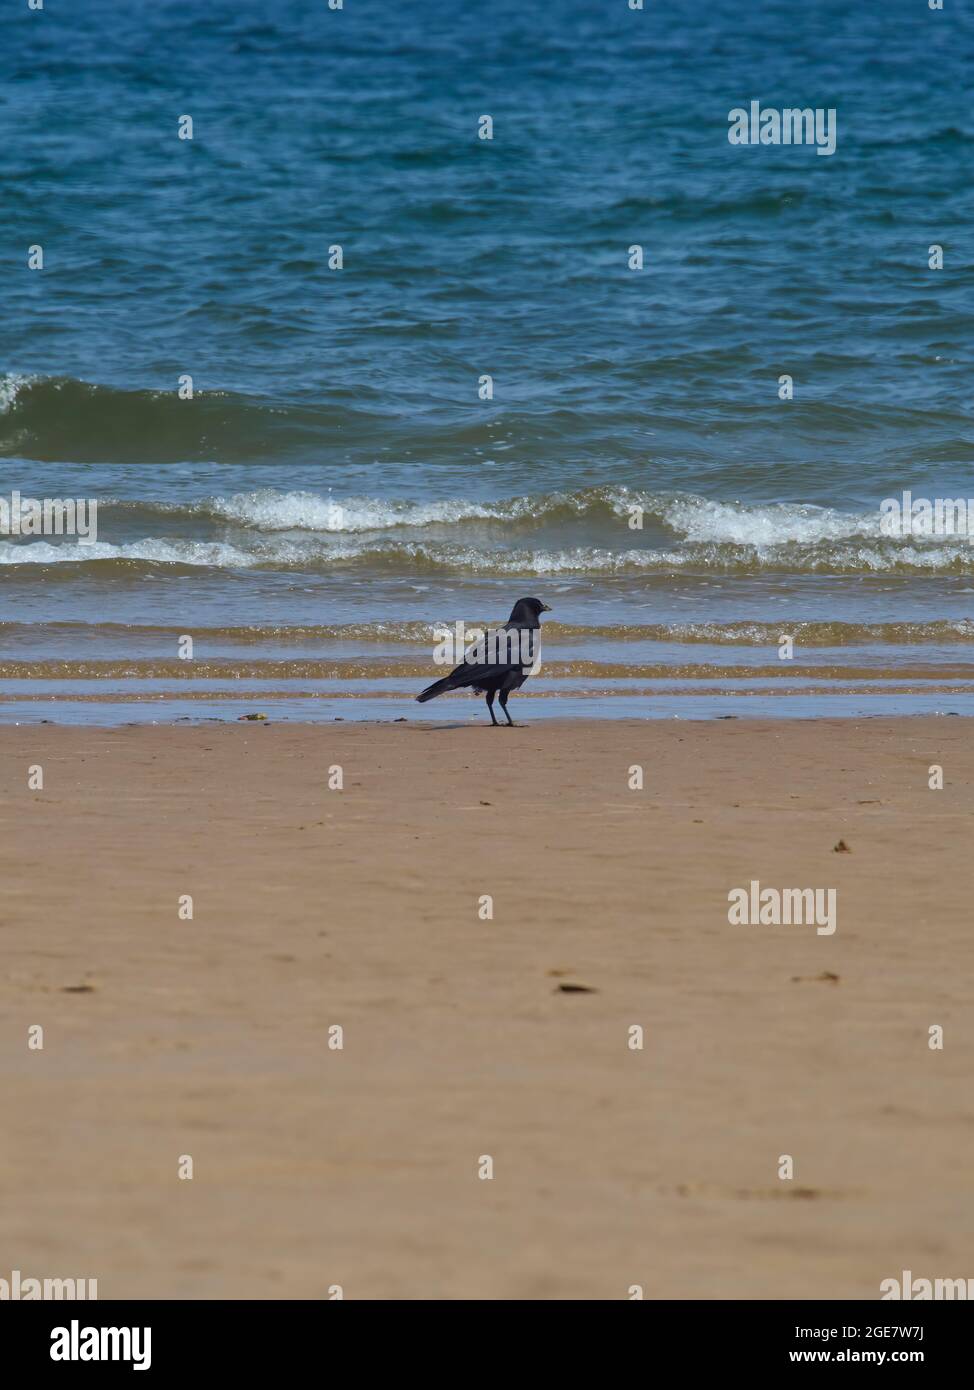 A crow, somewhat out of place(!), stands on a sandy beach at the water’s edge, gazing at the breaking waves of the sea. Stock Photo